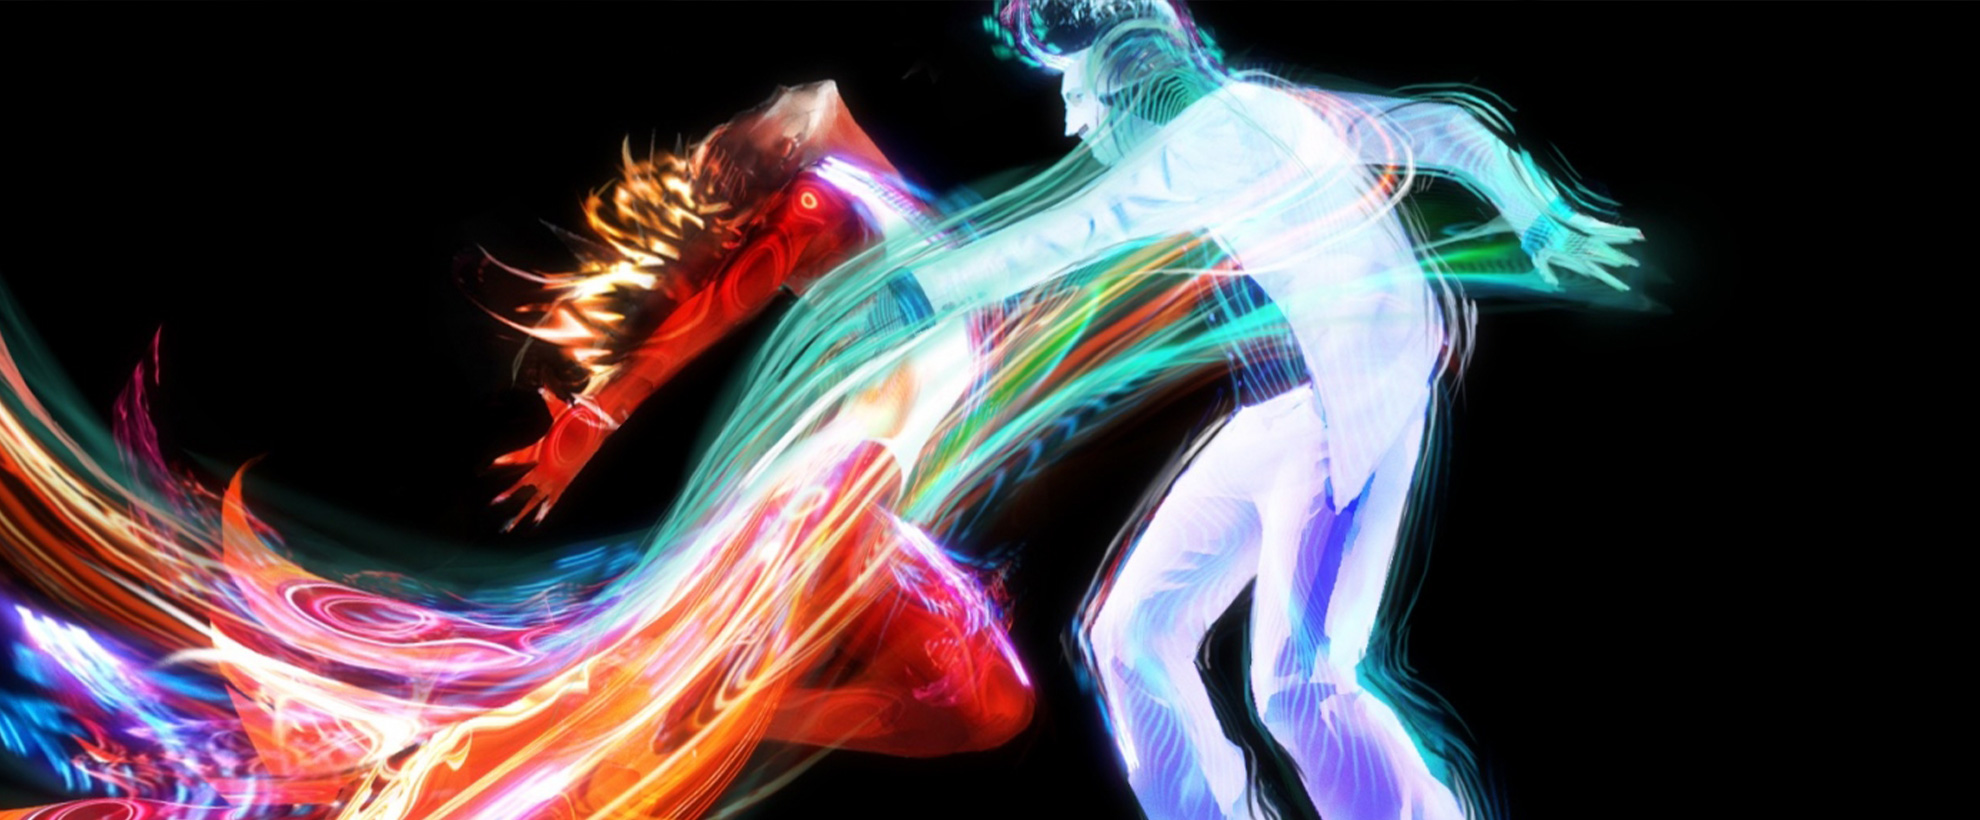 Concept art showing a man and a woman dancing, made of bright colours